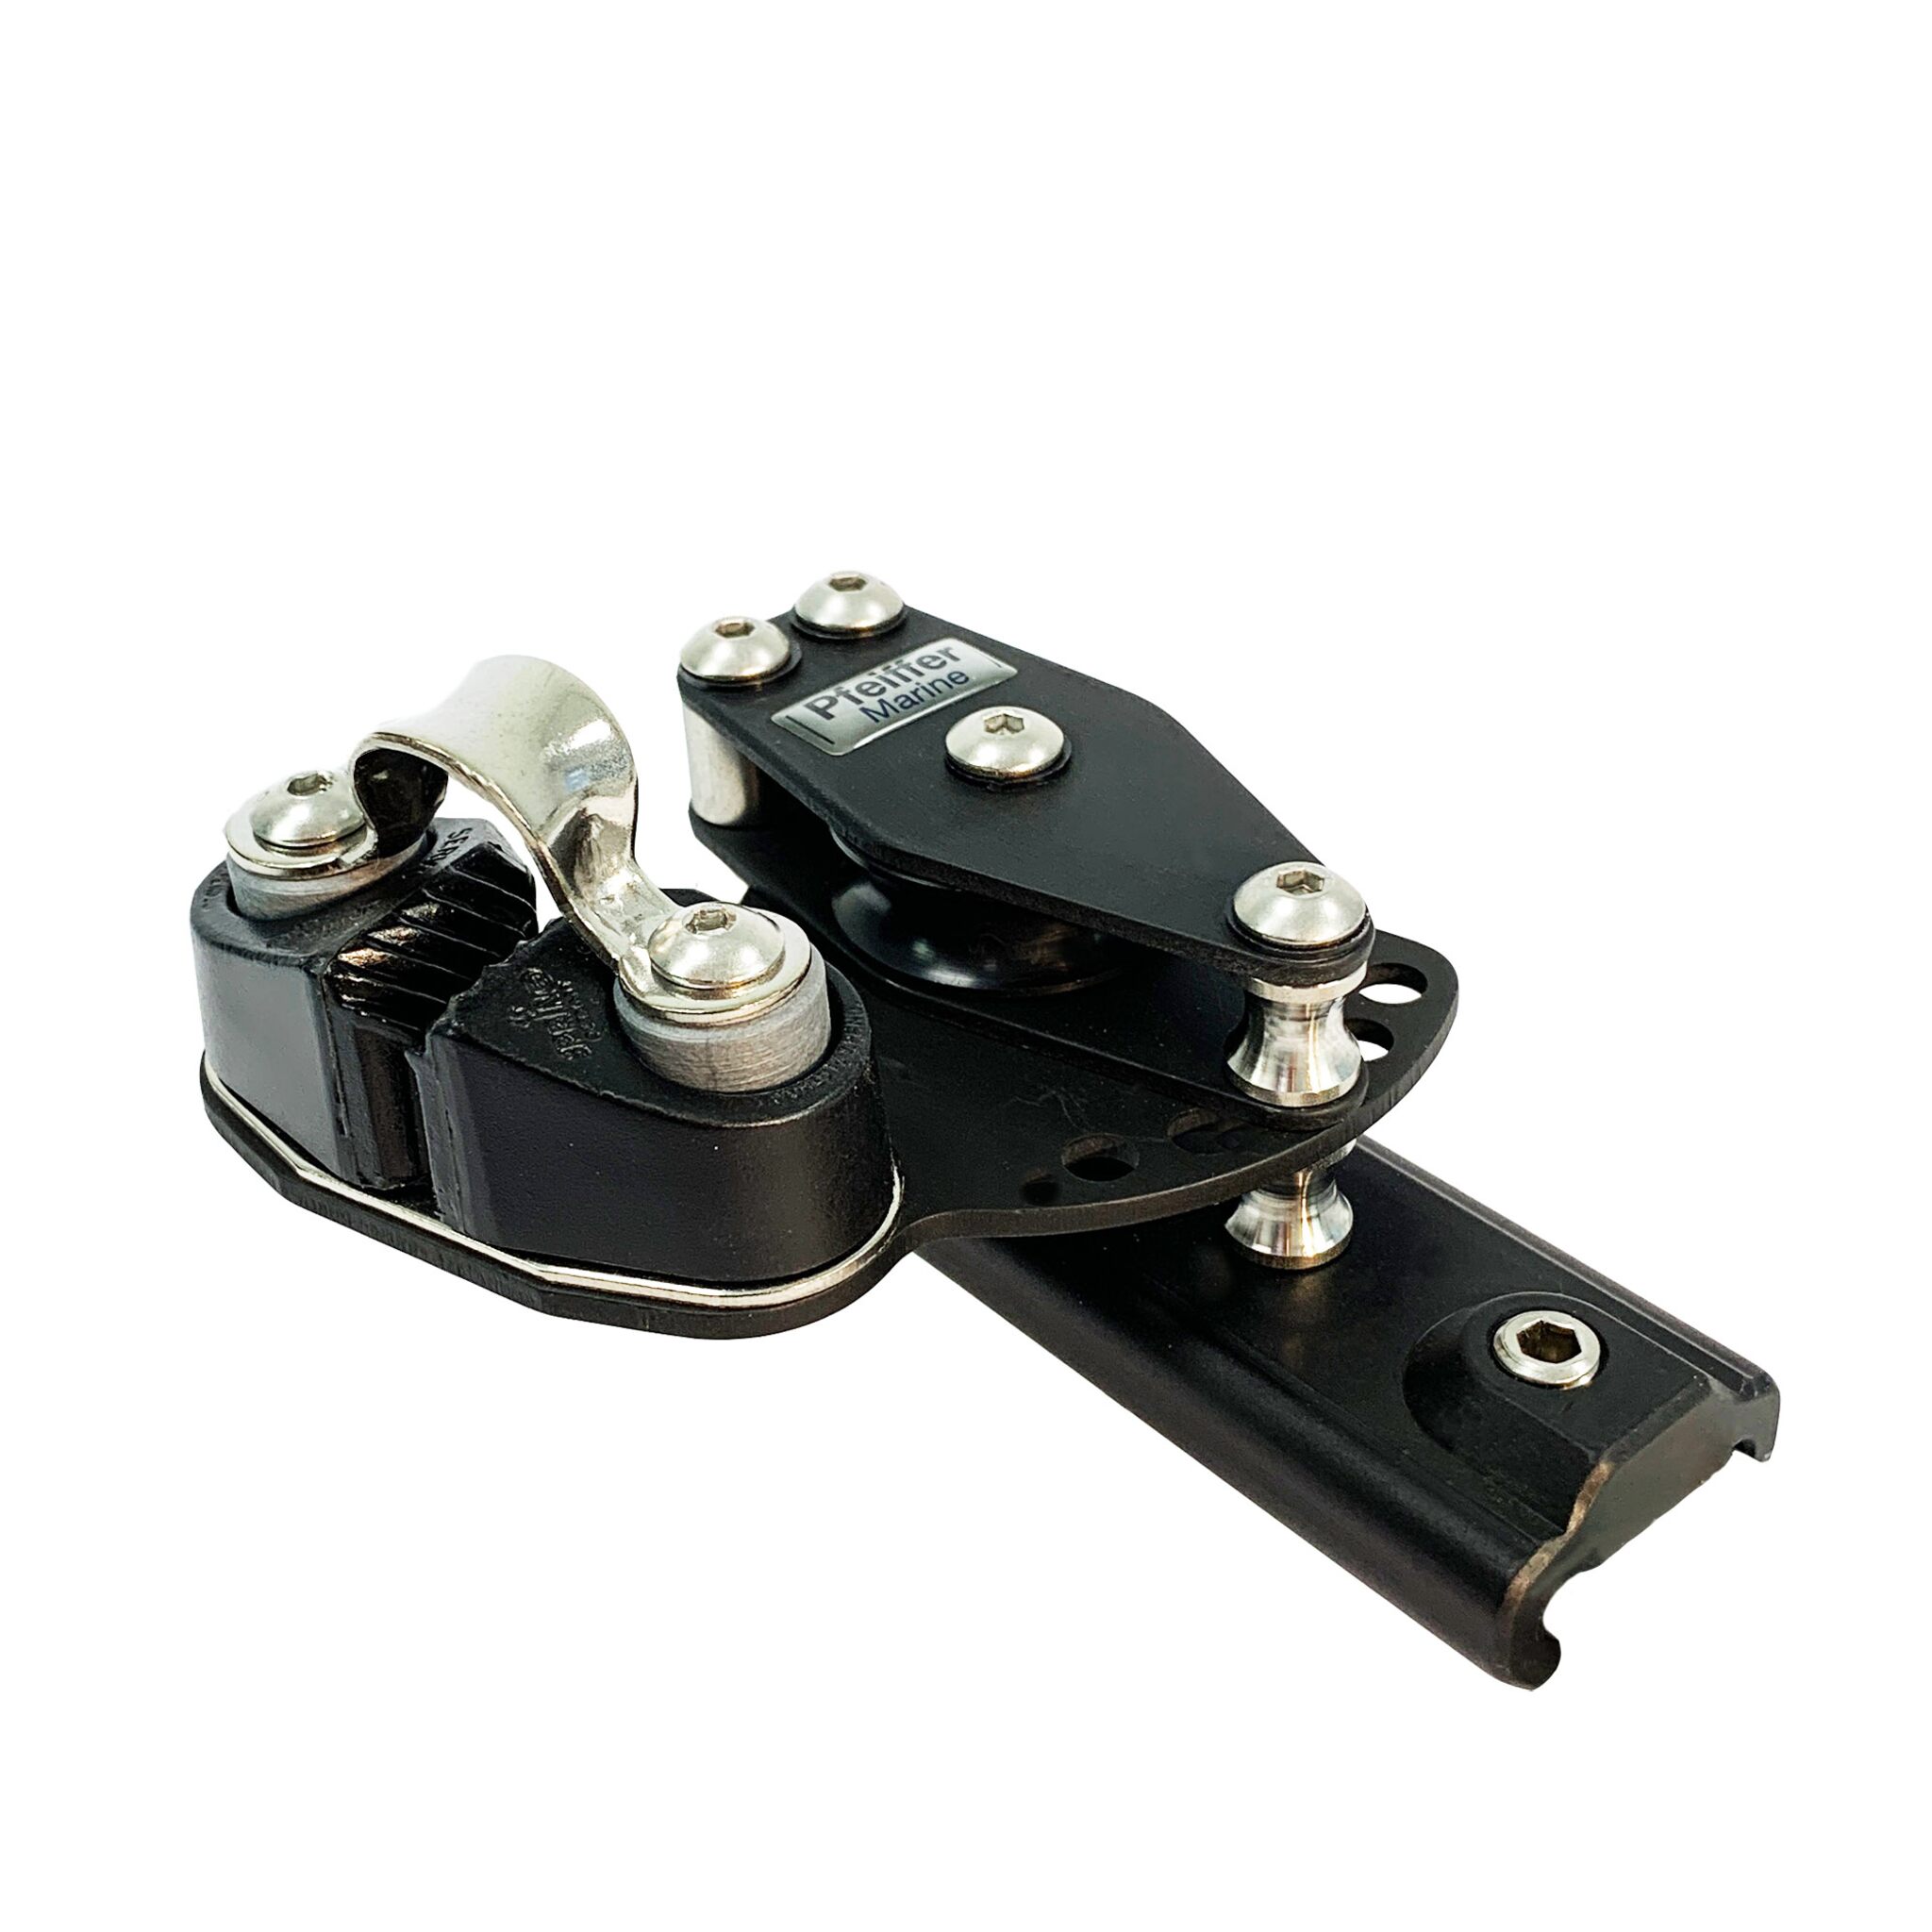 Pfeiffer Traveller Control Block with Clamp